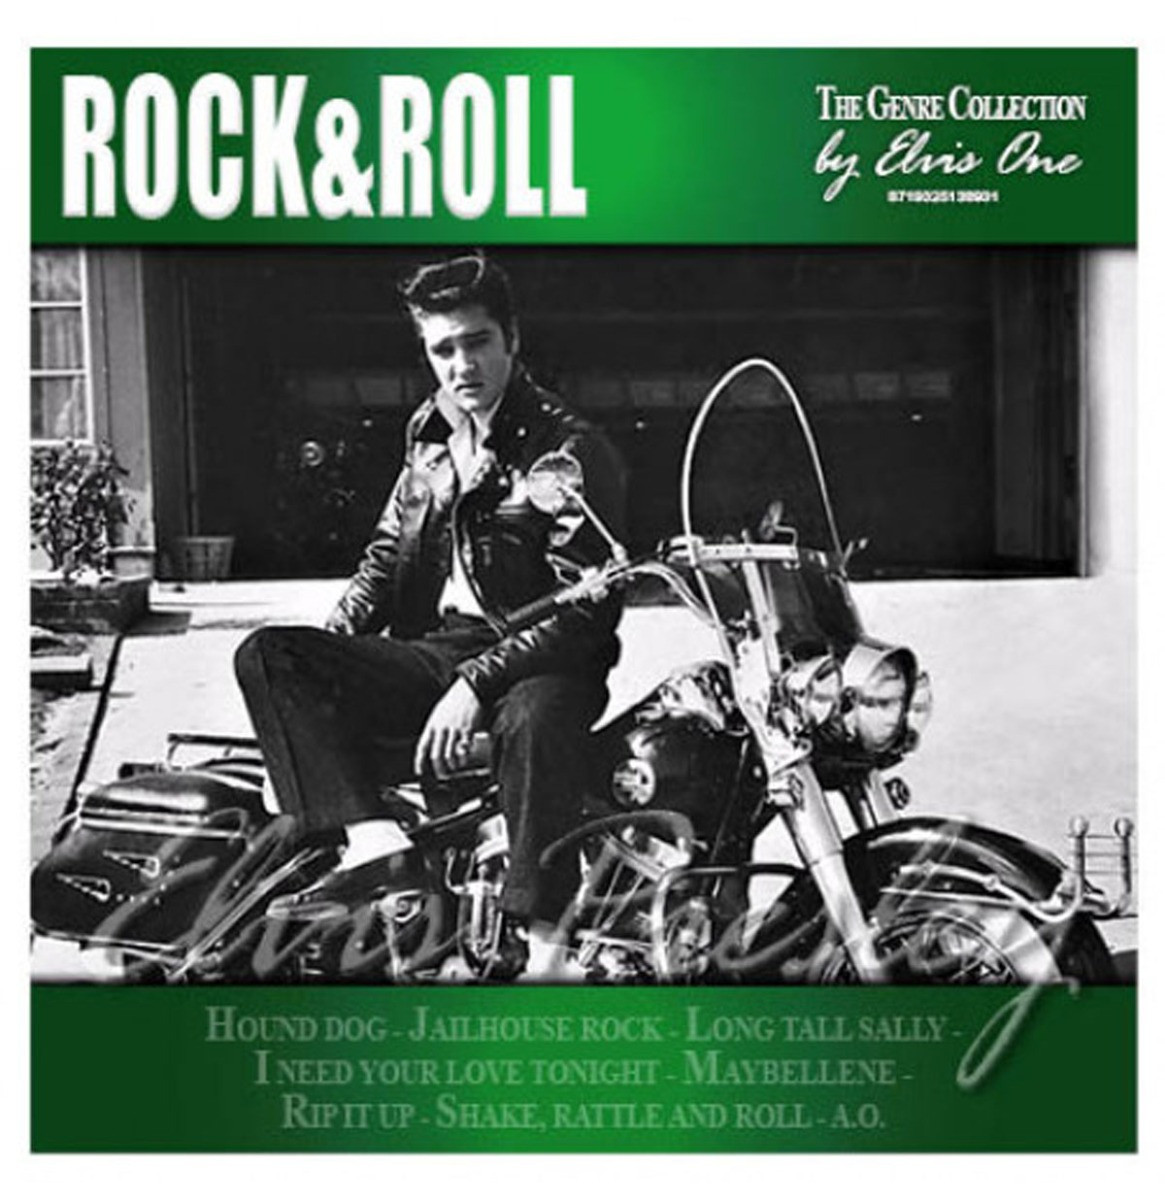 Elvis Presley: Rock & Roll - The Genre Collection By Elvis One